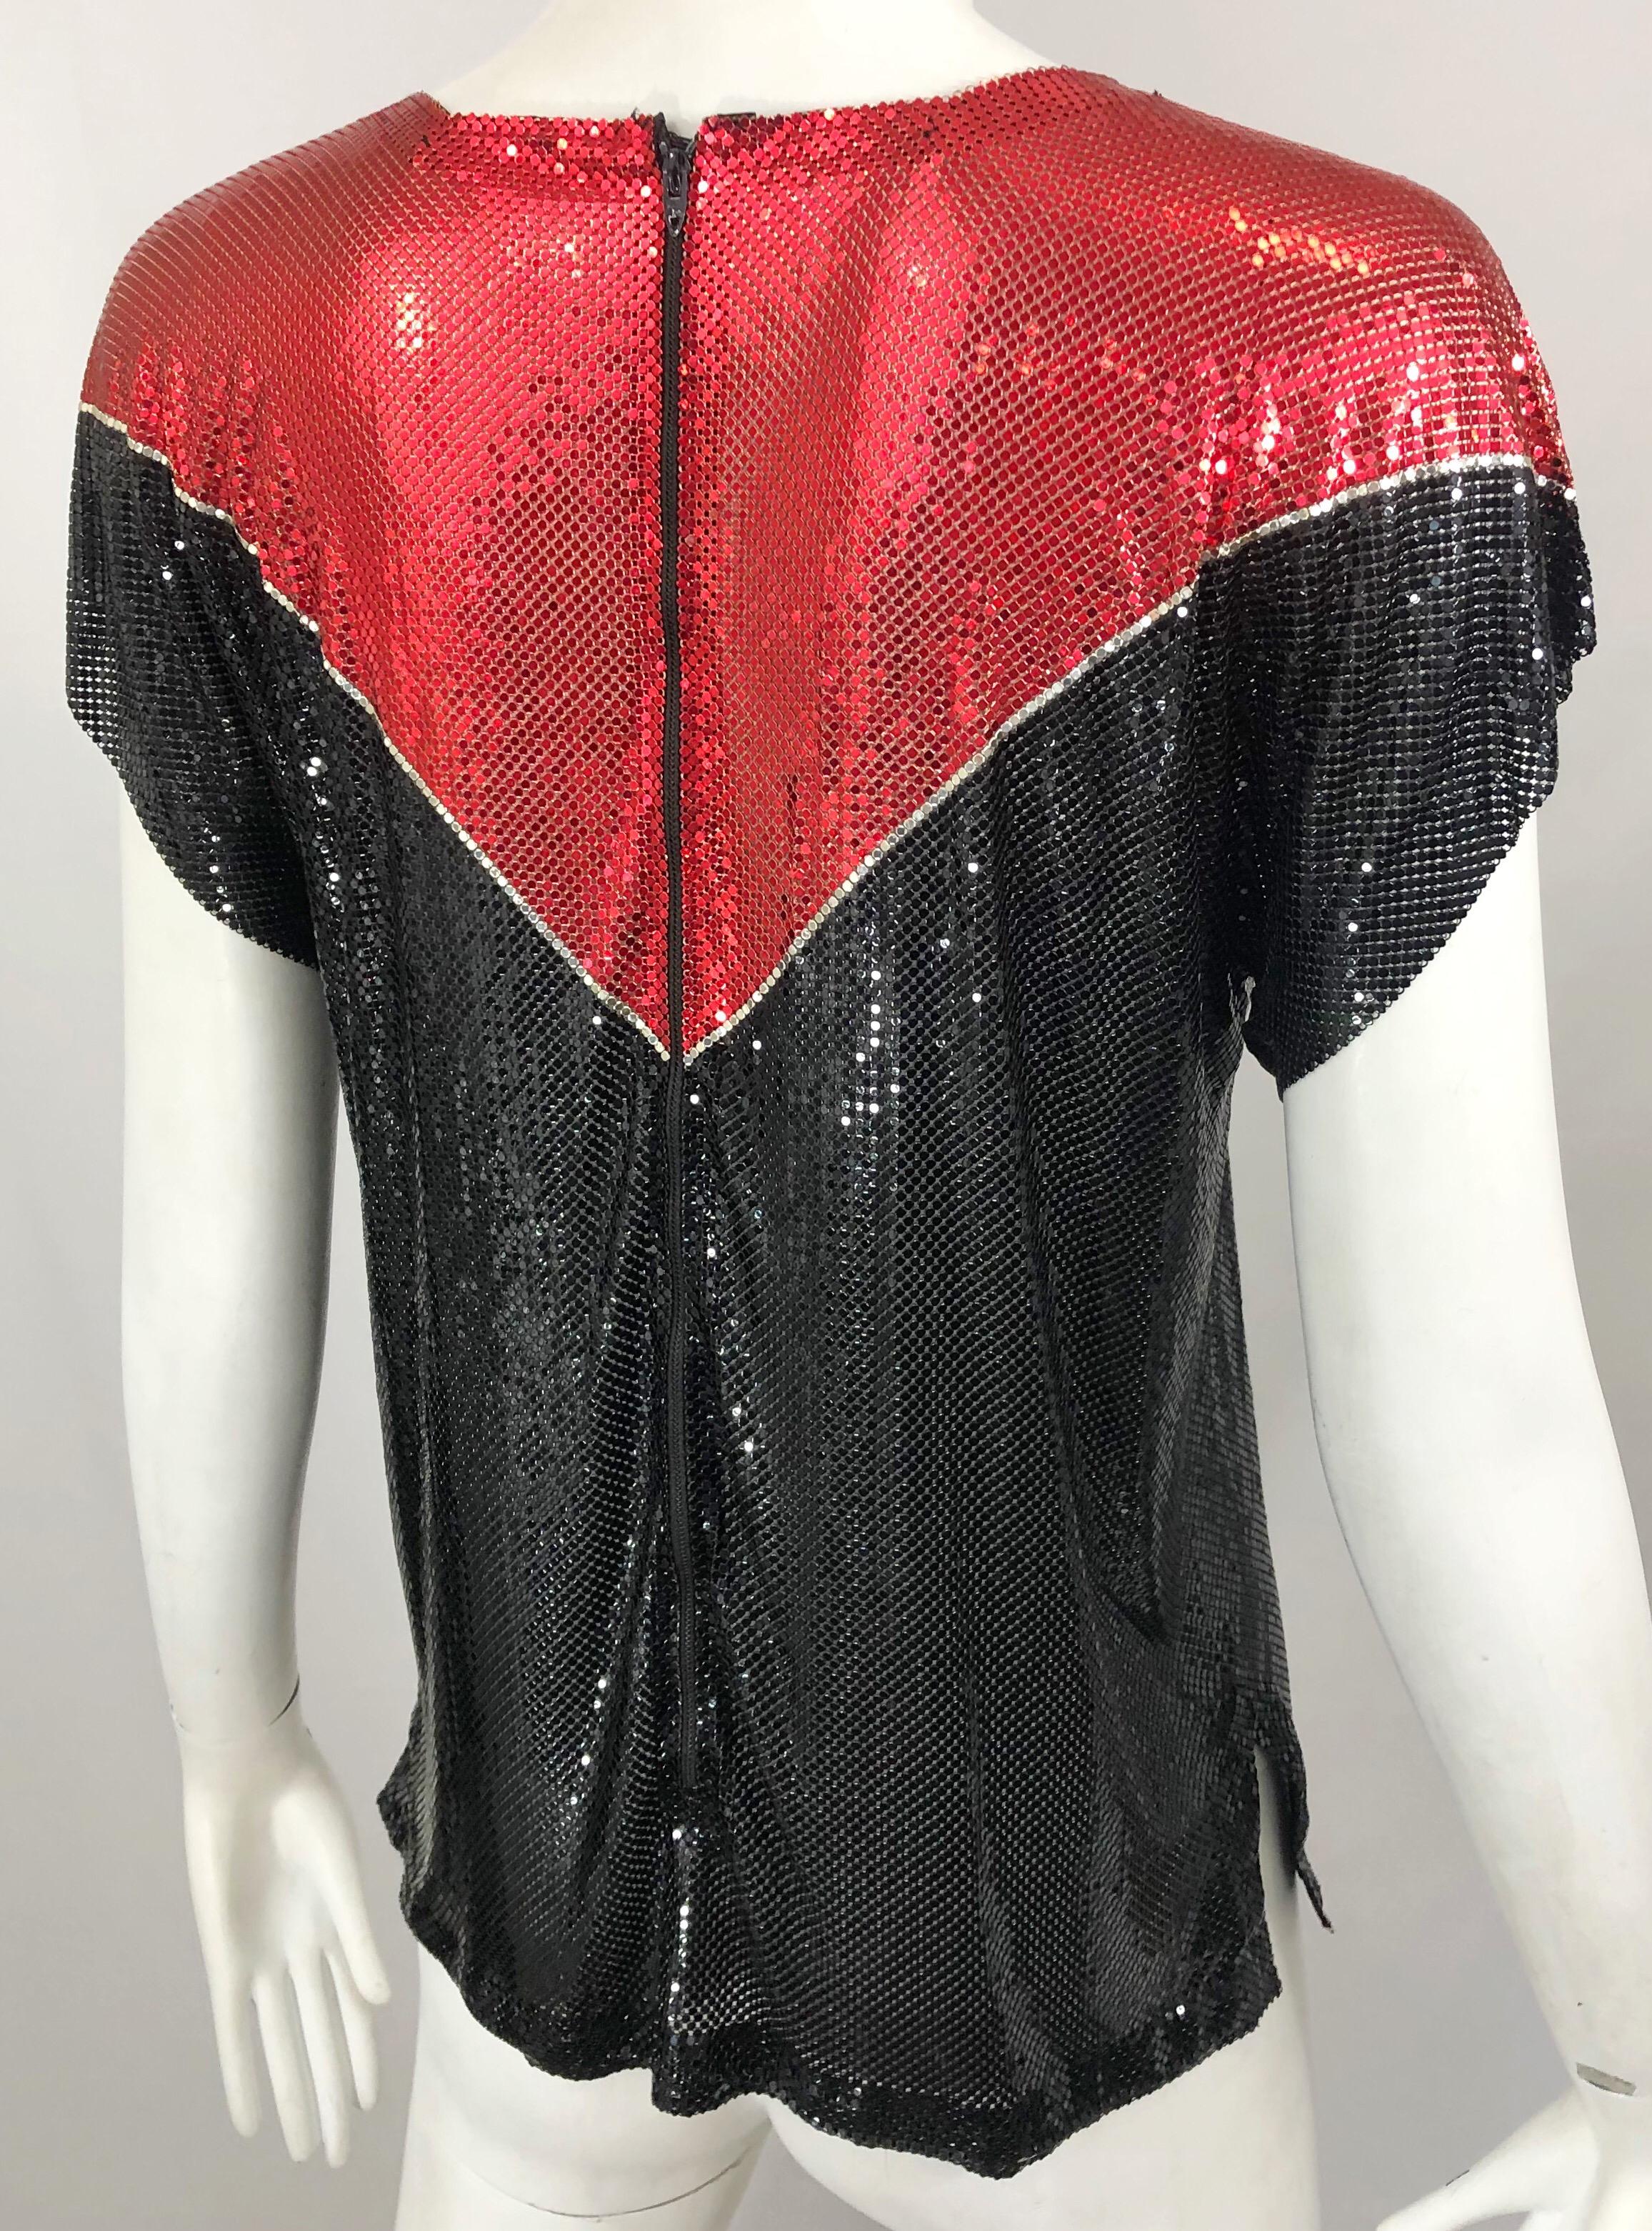 Avant Garde 1970s Whiting & Davis Red + Black + Silver Chainmail Metal Mesh Top For Sale 2